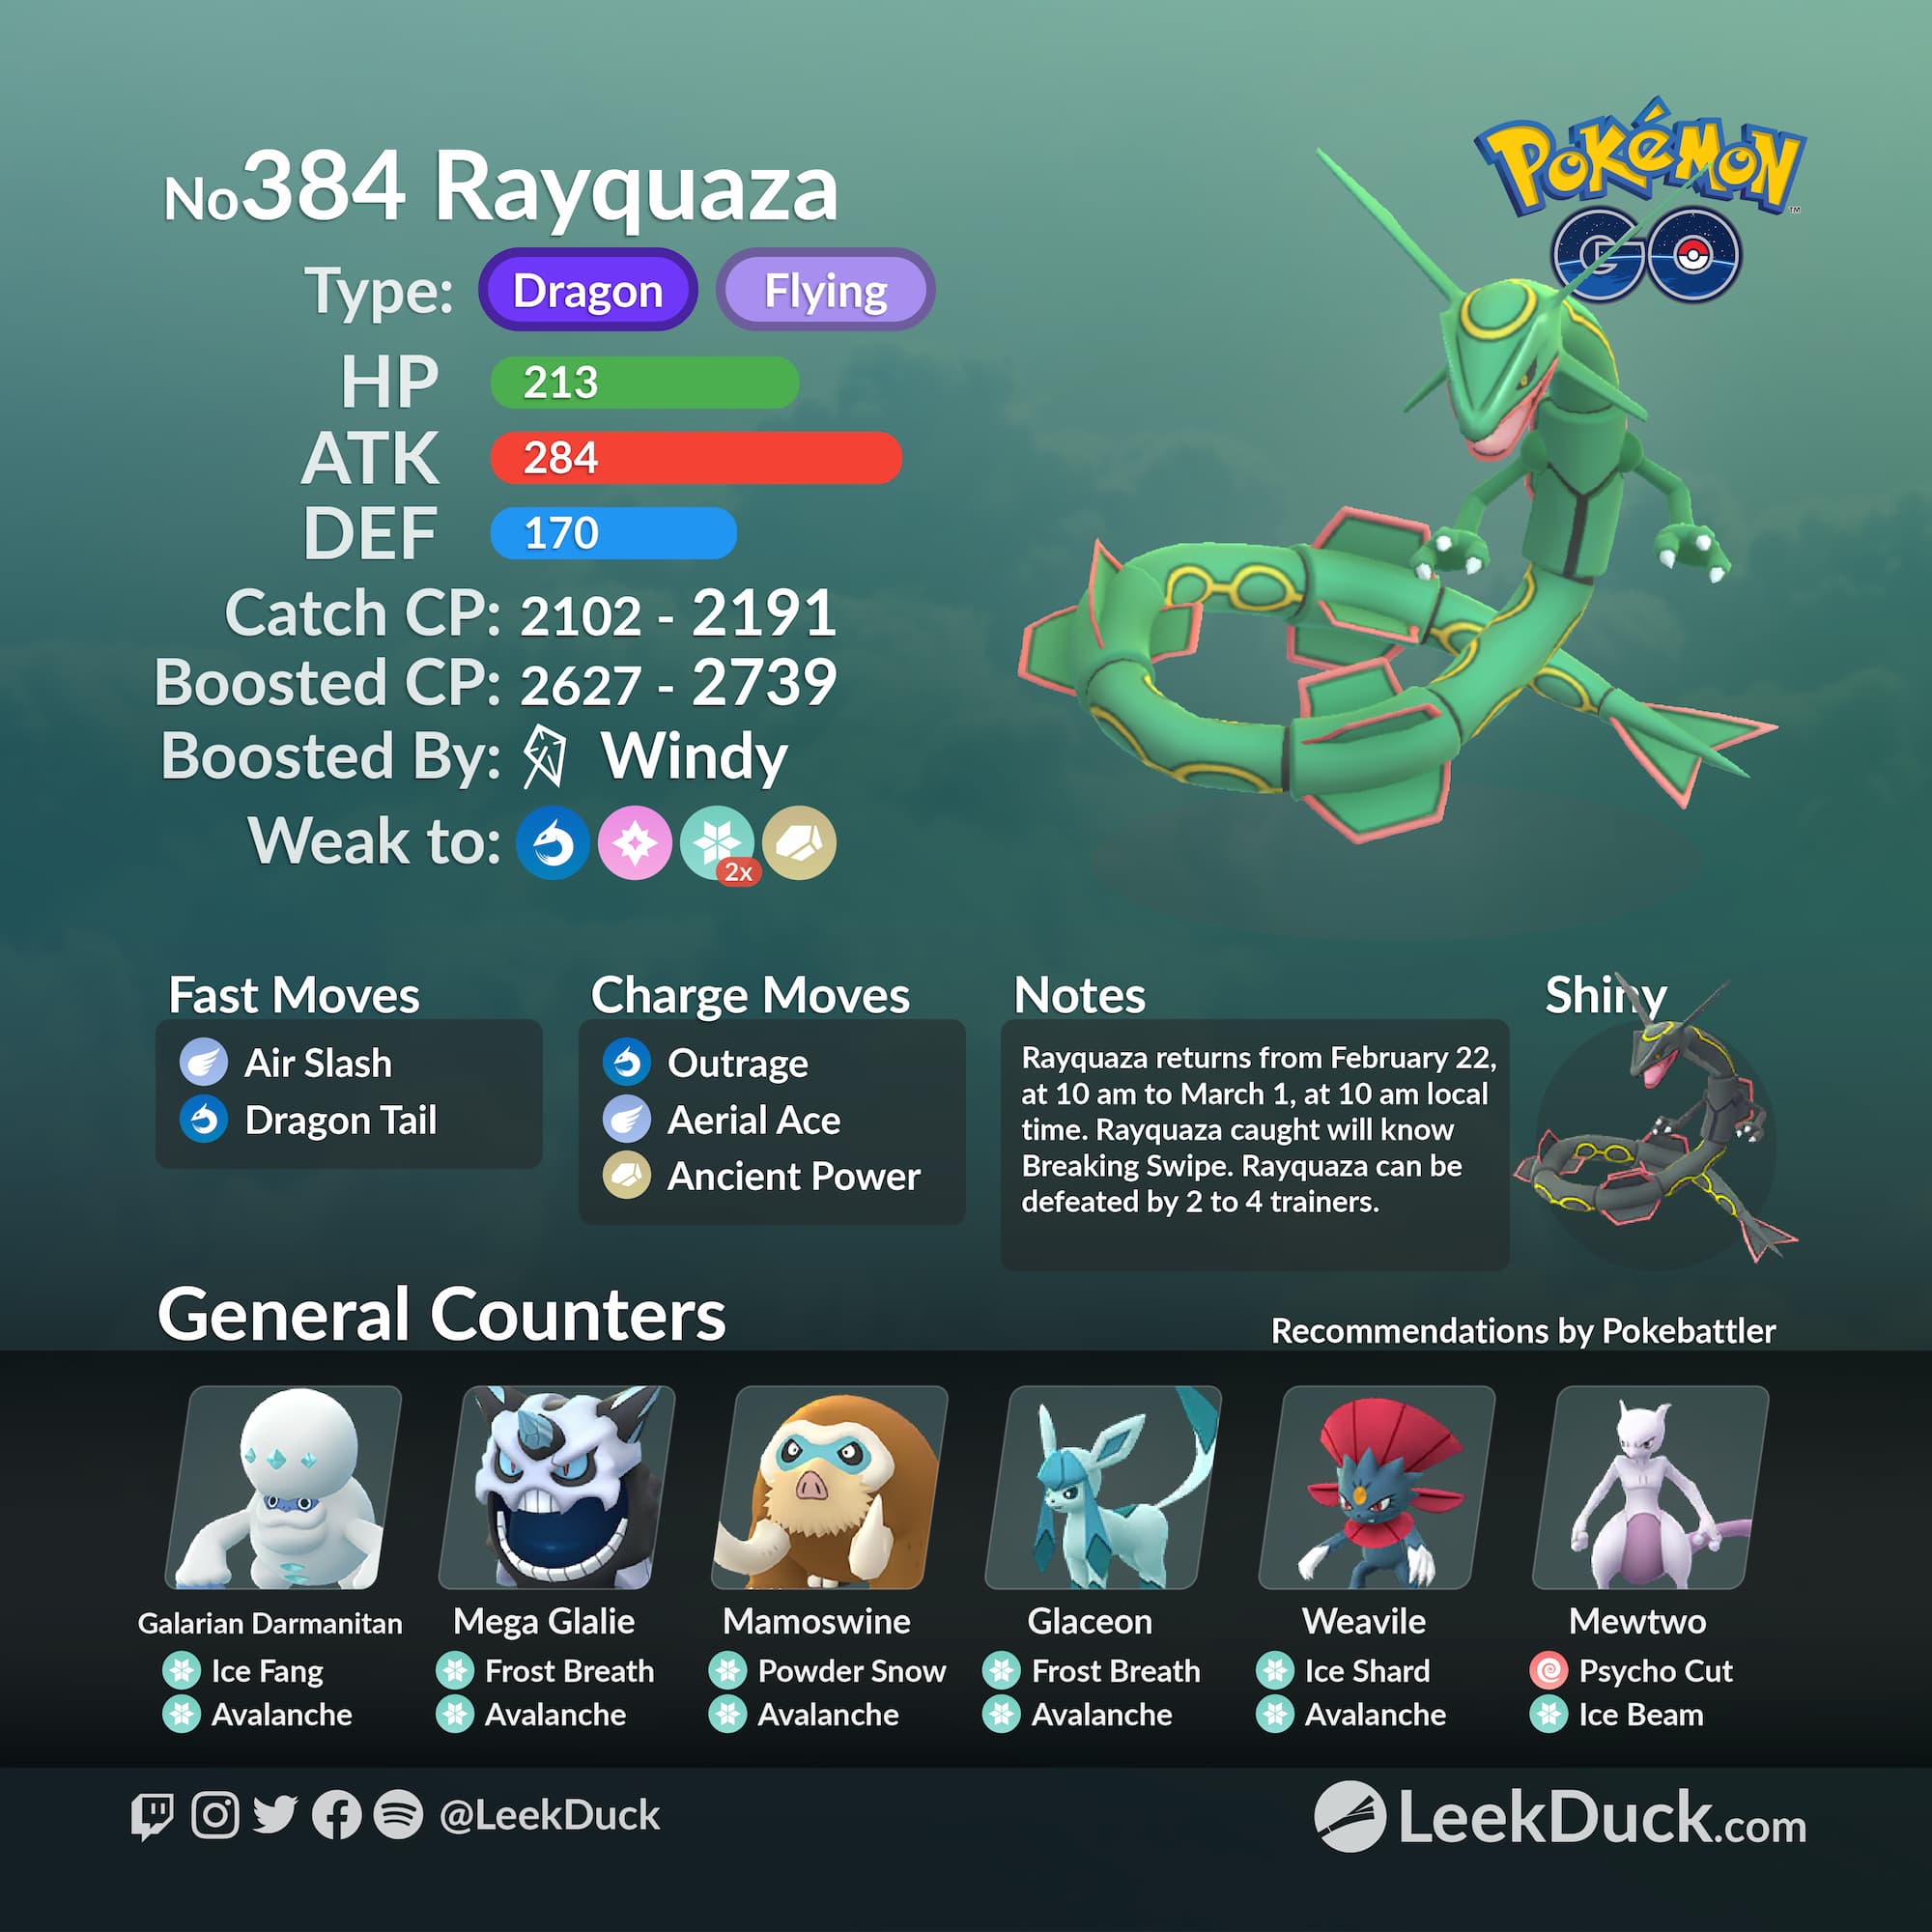 The one about shiny Rayquaza and event fatigue